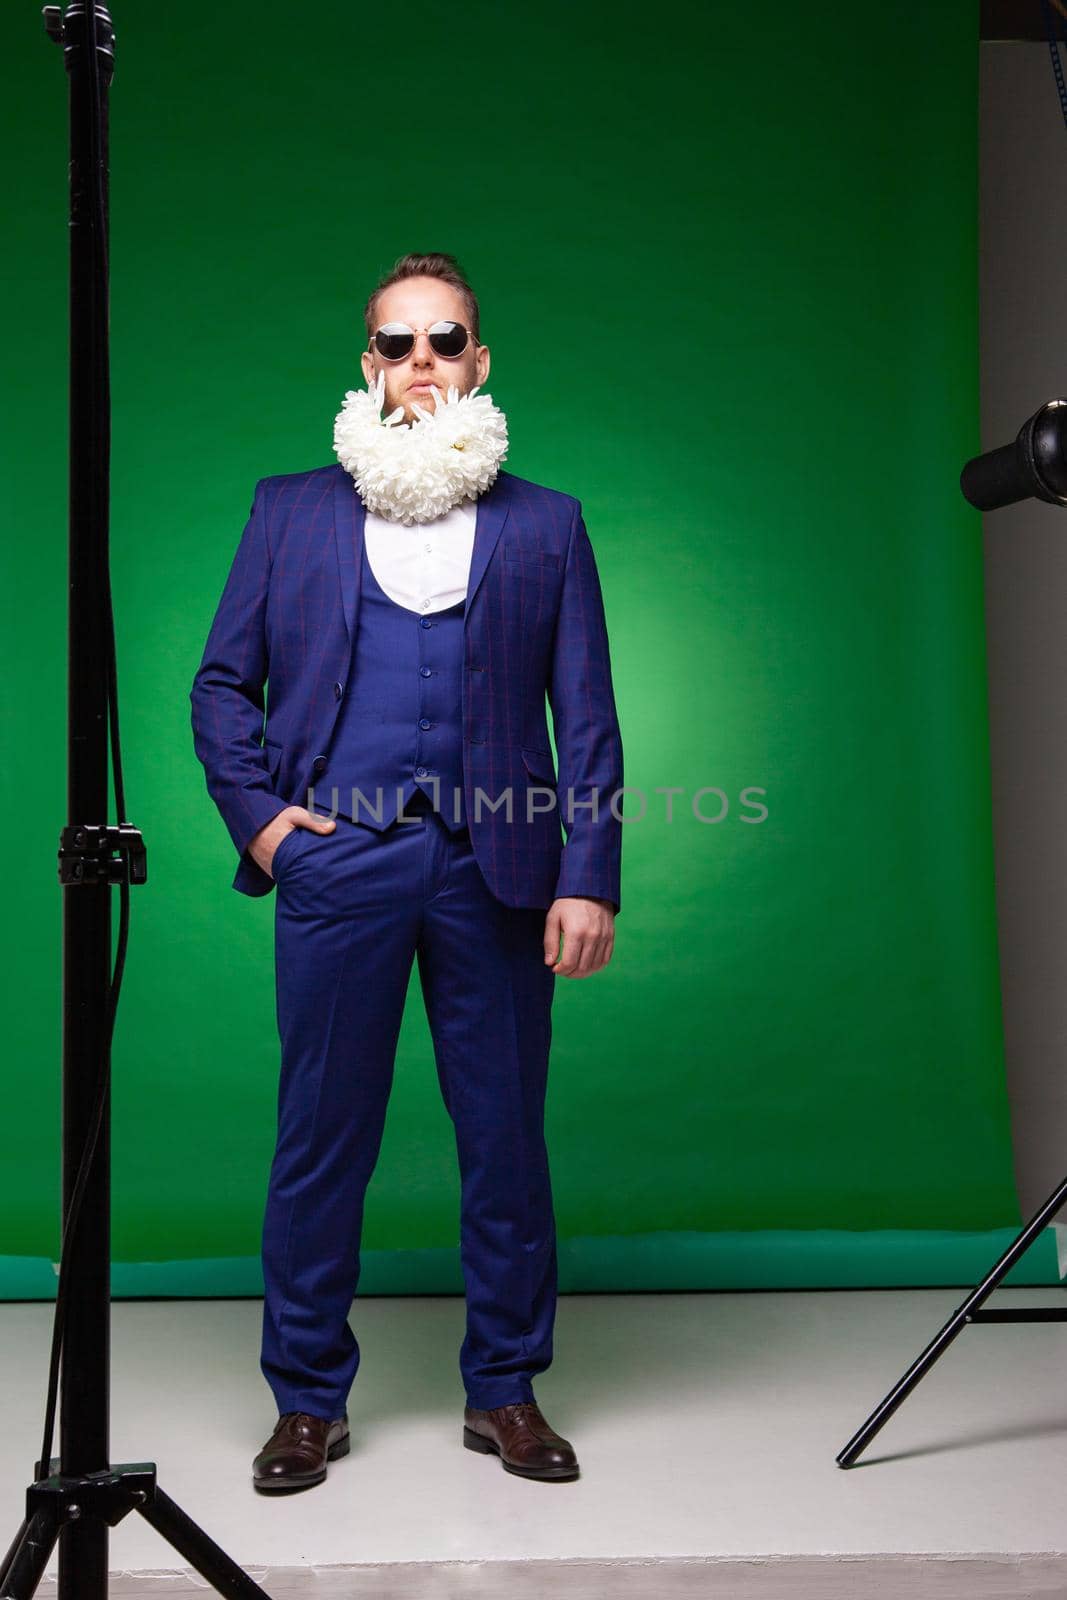 Confident male in elegant suit and sunglasses standing with white flowers in beard in studio on green background